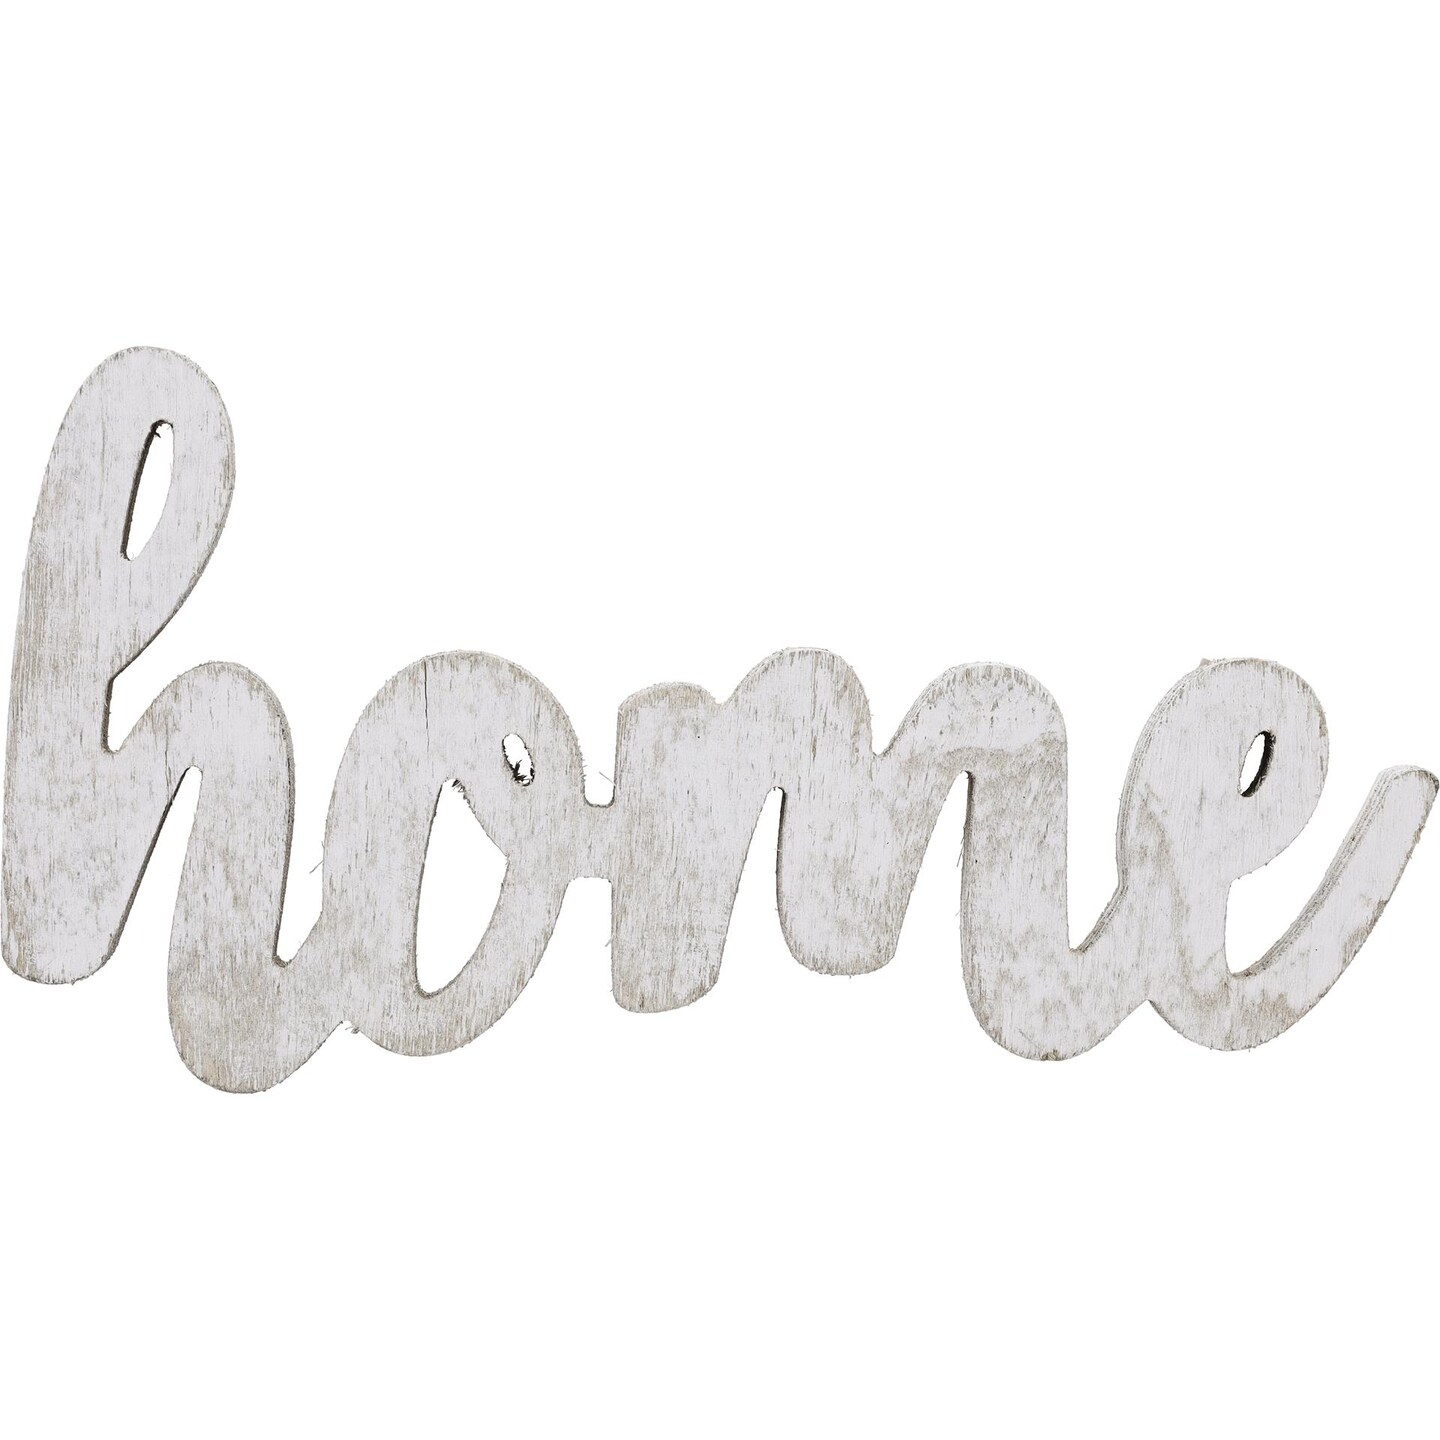 Hampton Art Wood Script Home White, approximately 9 inches long, unfinished for painting, decoupage, stenciling or embellishments, easy to customize